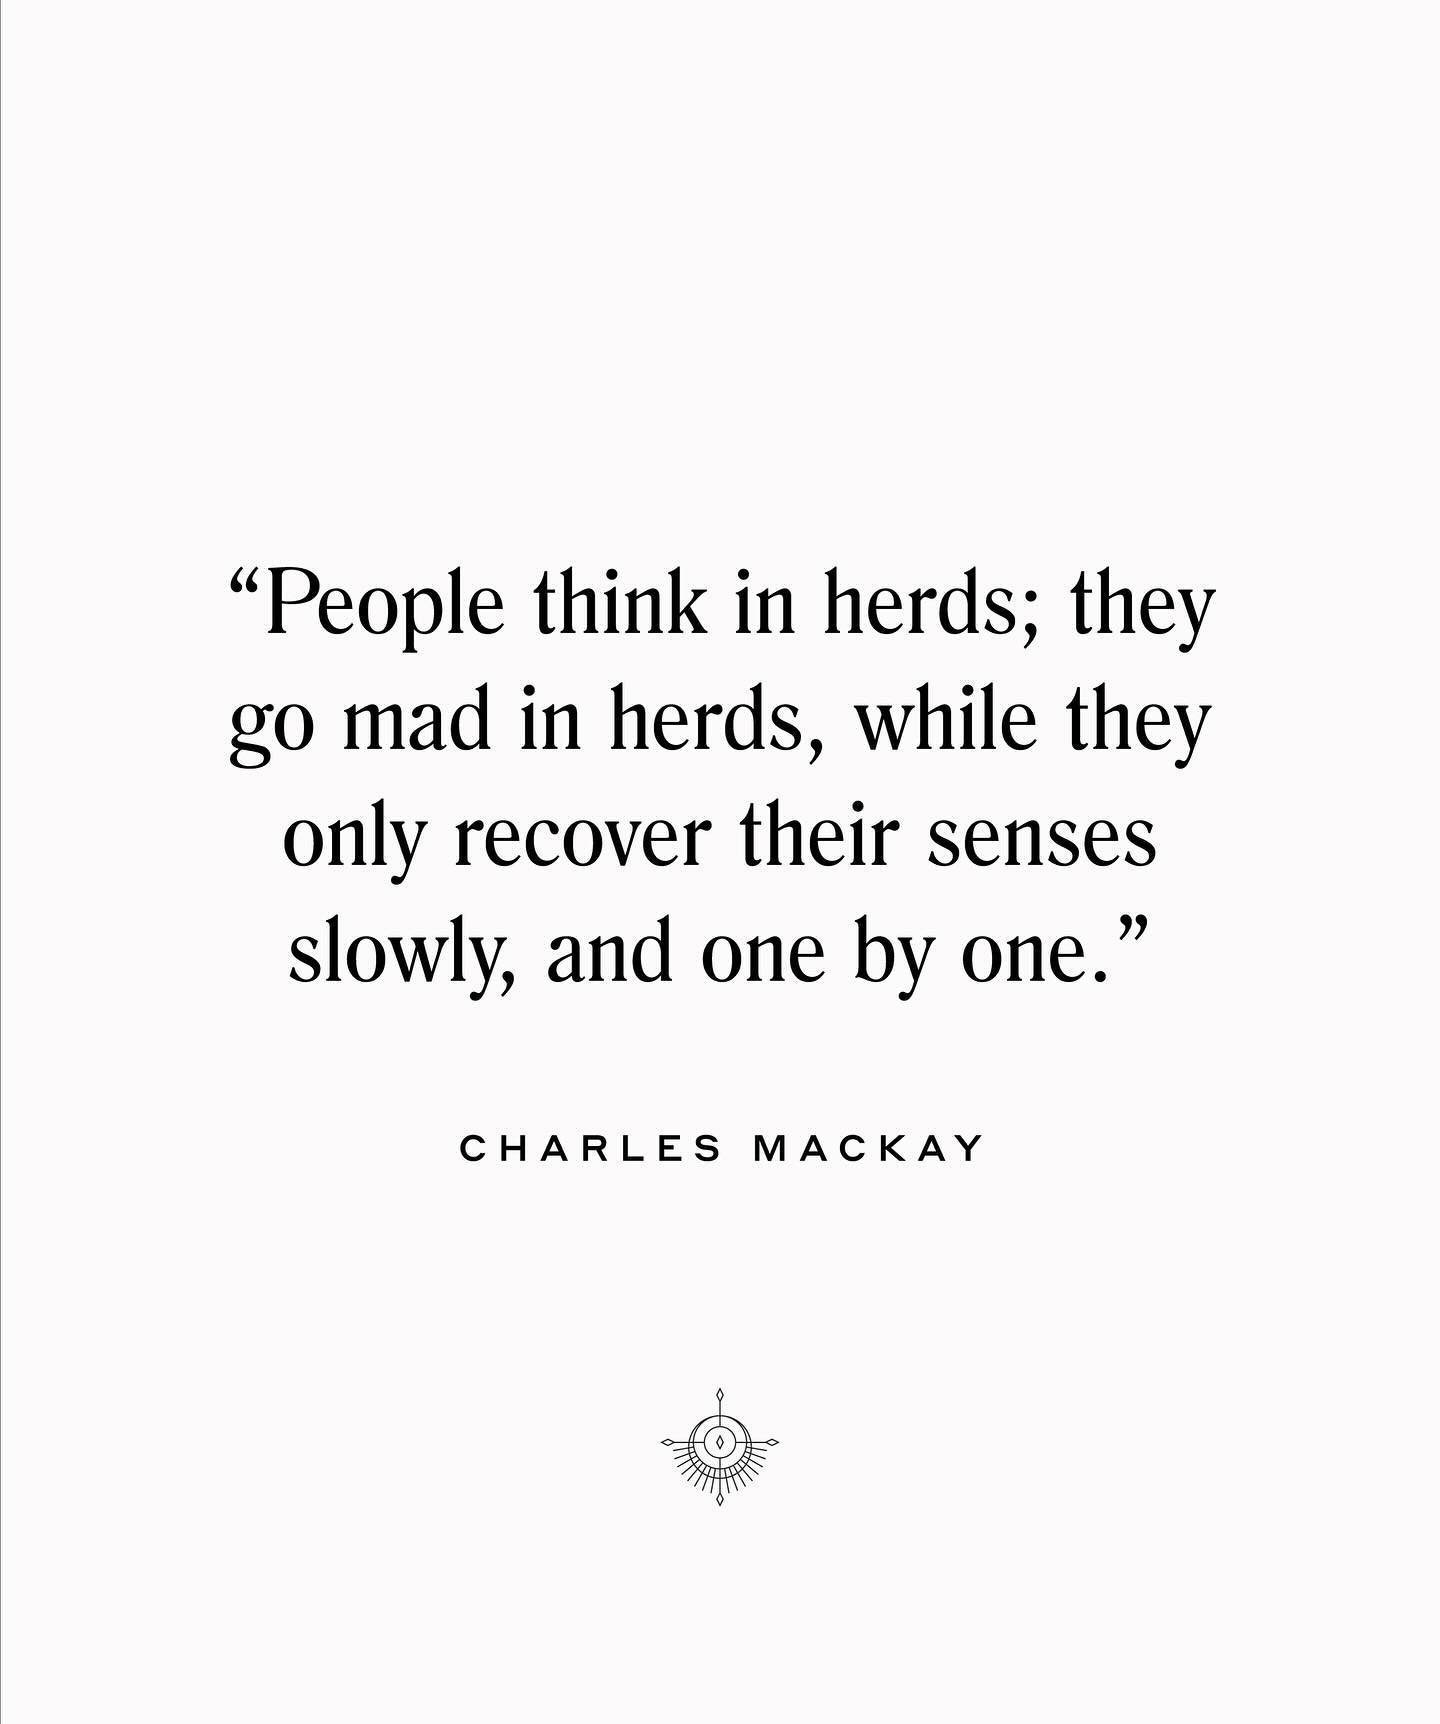 I love this quote from Charles Mackay; it&rsquo;s so prescient for our current climate. People are hurt and angry, and rightfully so in many situations of injustice and frustration. However, it becomes dangerous when people refuse to examine their ow